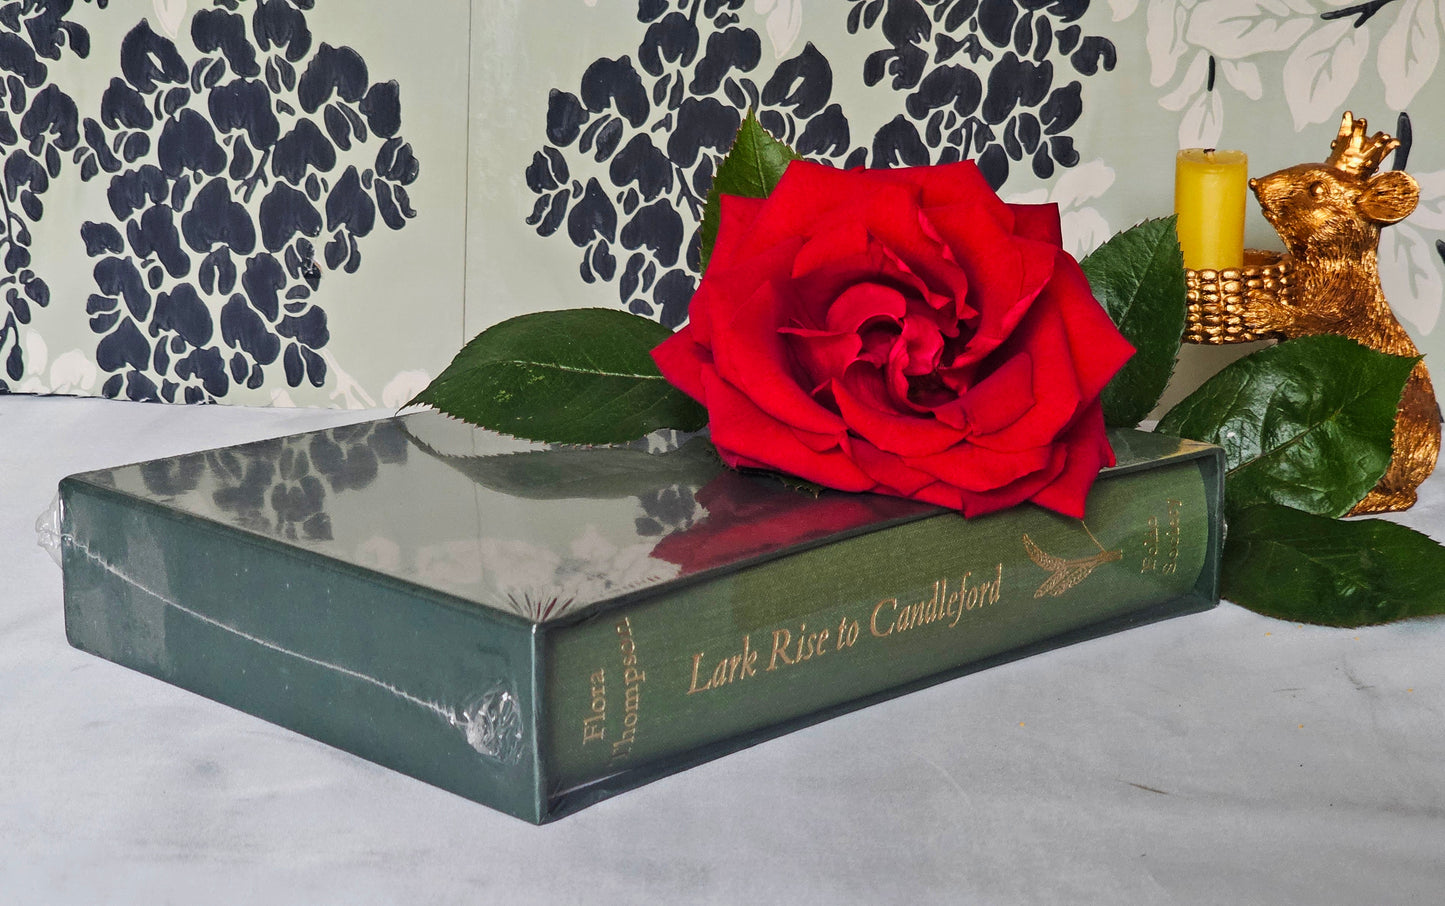 2009 Lark Rise To Candleford by Flora Thompson / SEALED and in FINE Condition / Richly Illustrated